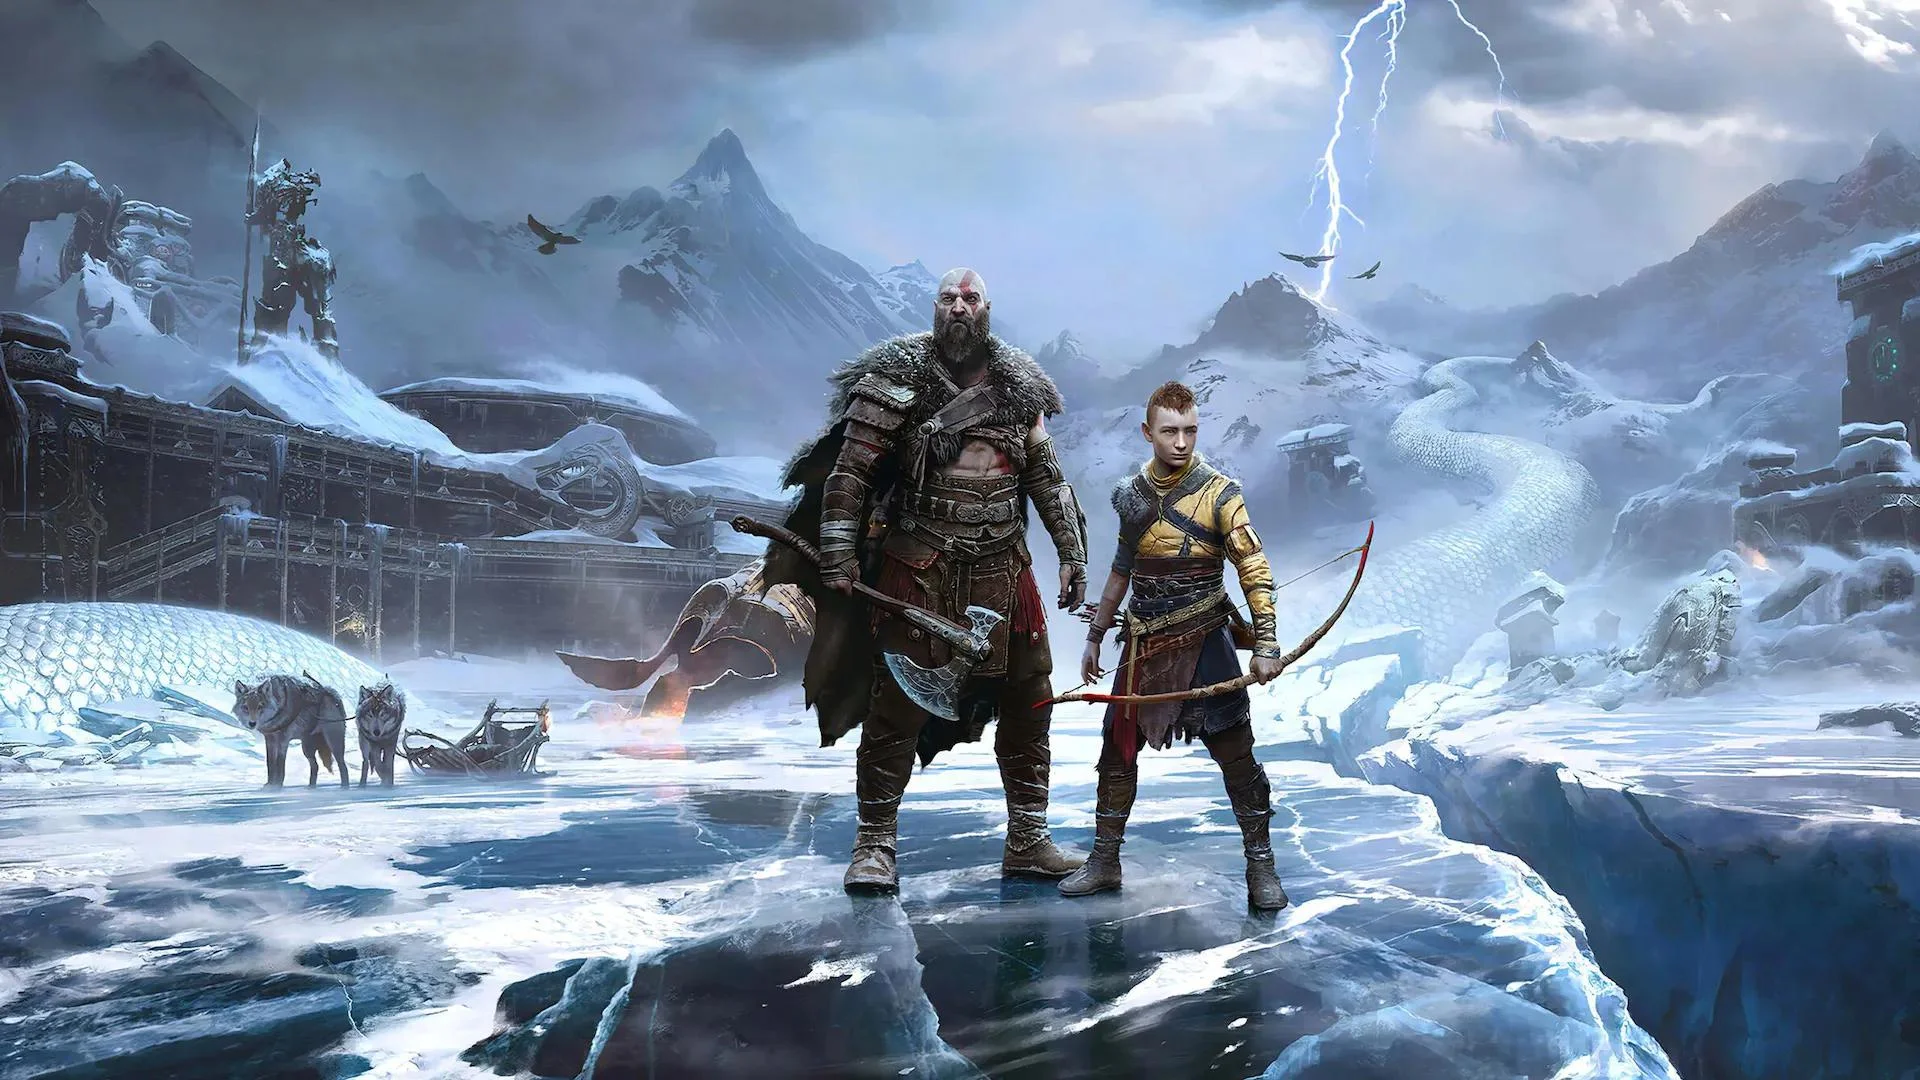 God of War: Ragnarok may soon be announced for PC